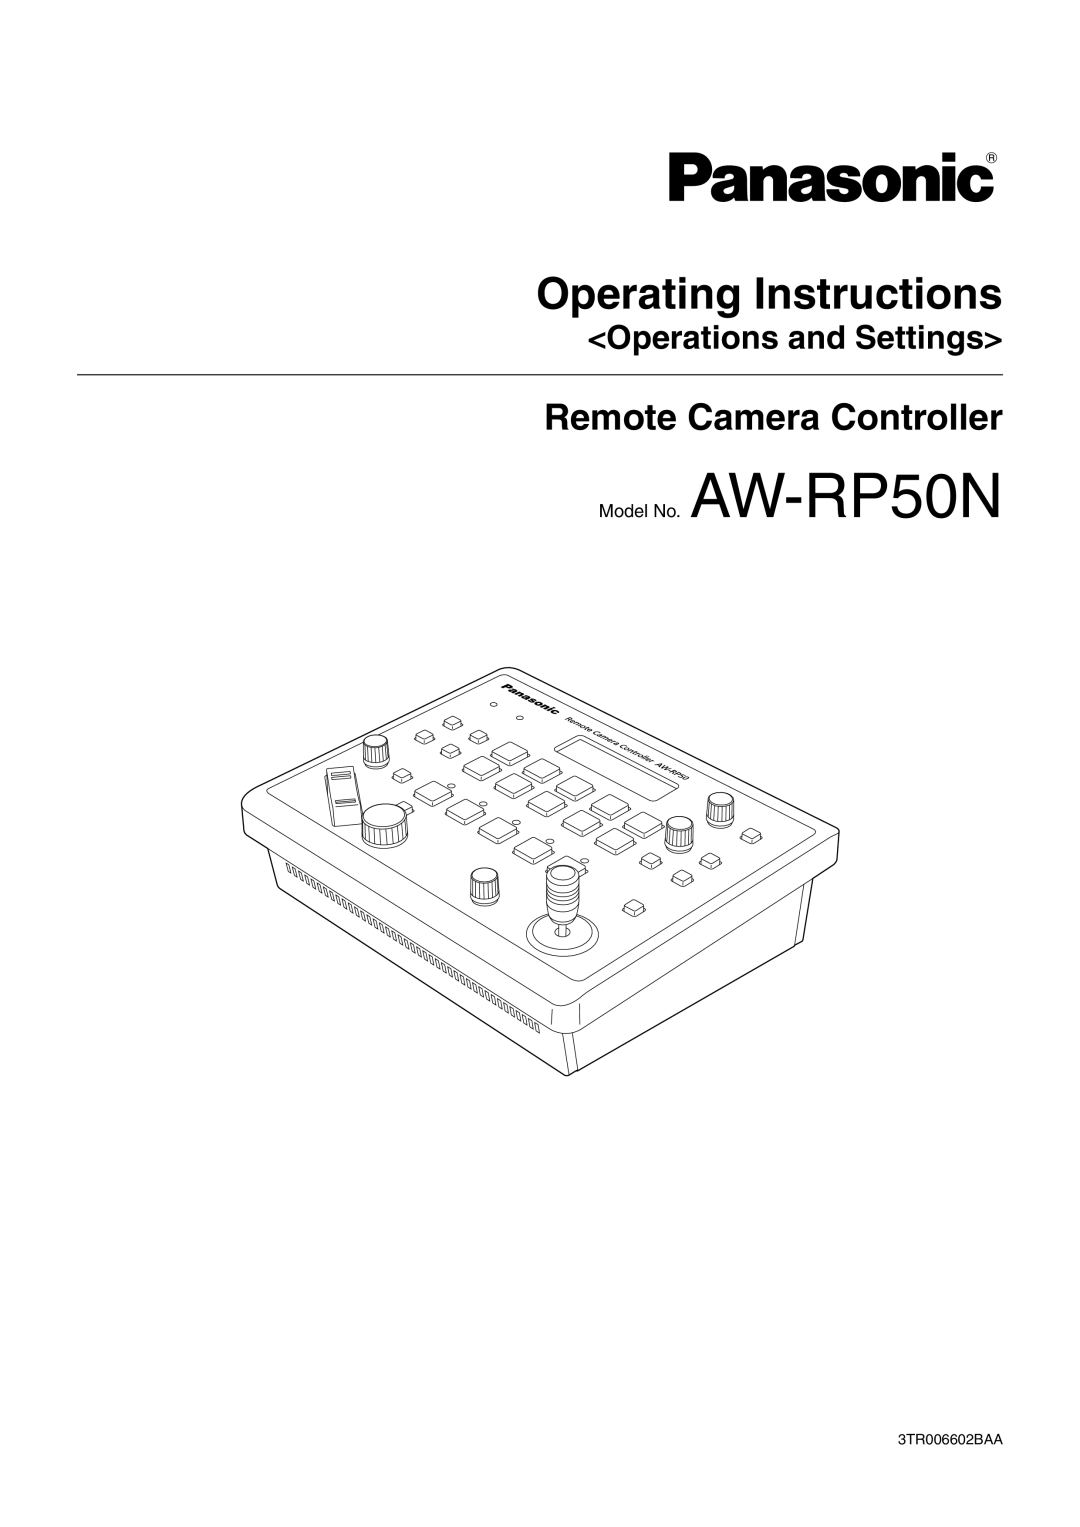 Panasonic operating instructions Operating Instructions, Remote Camera Controller, Model No. AW-RP50N 